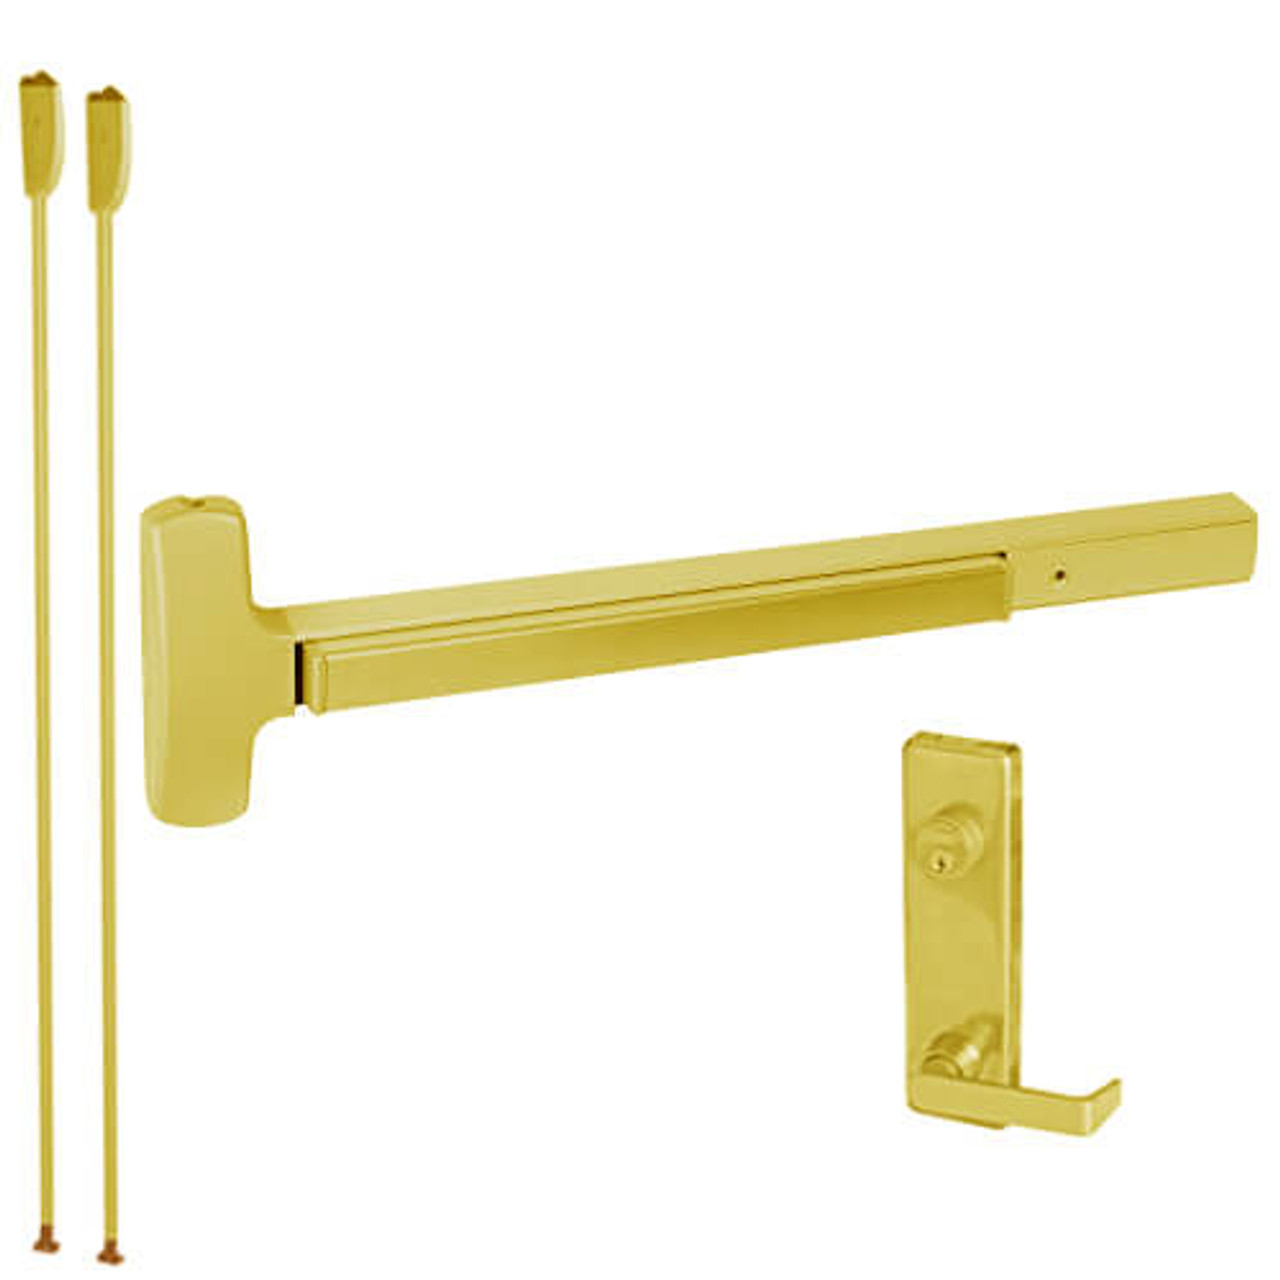 25-V-L-NL-DANE-US3-2-LHR Falcon Exit Device in Polished Brass